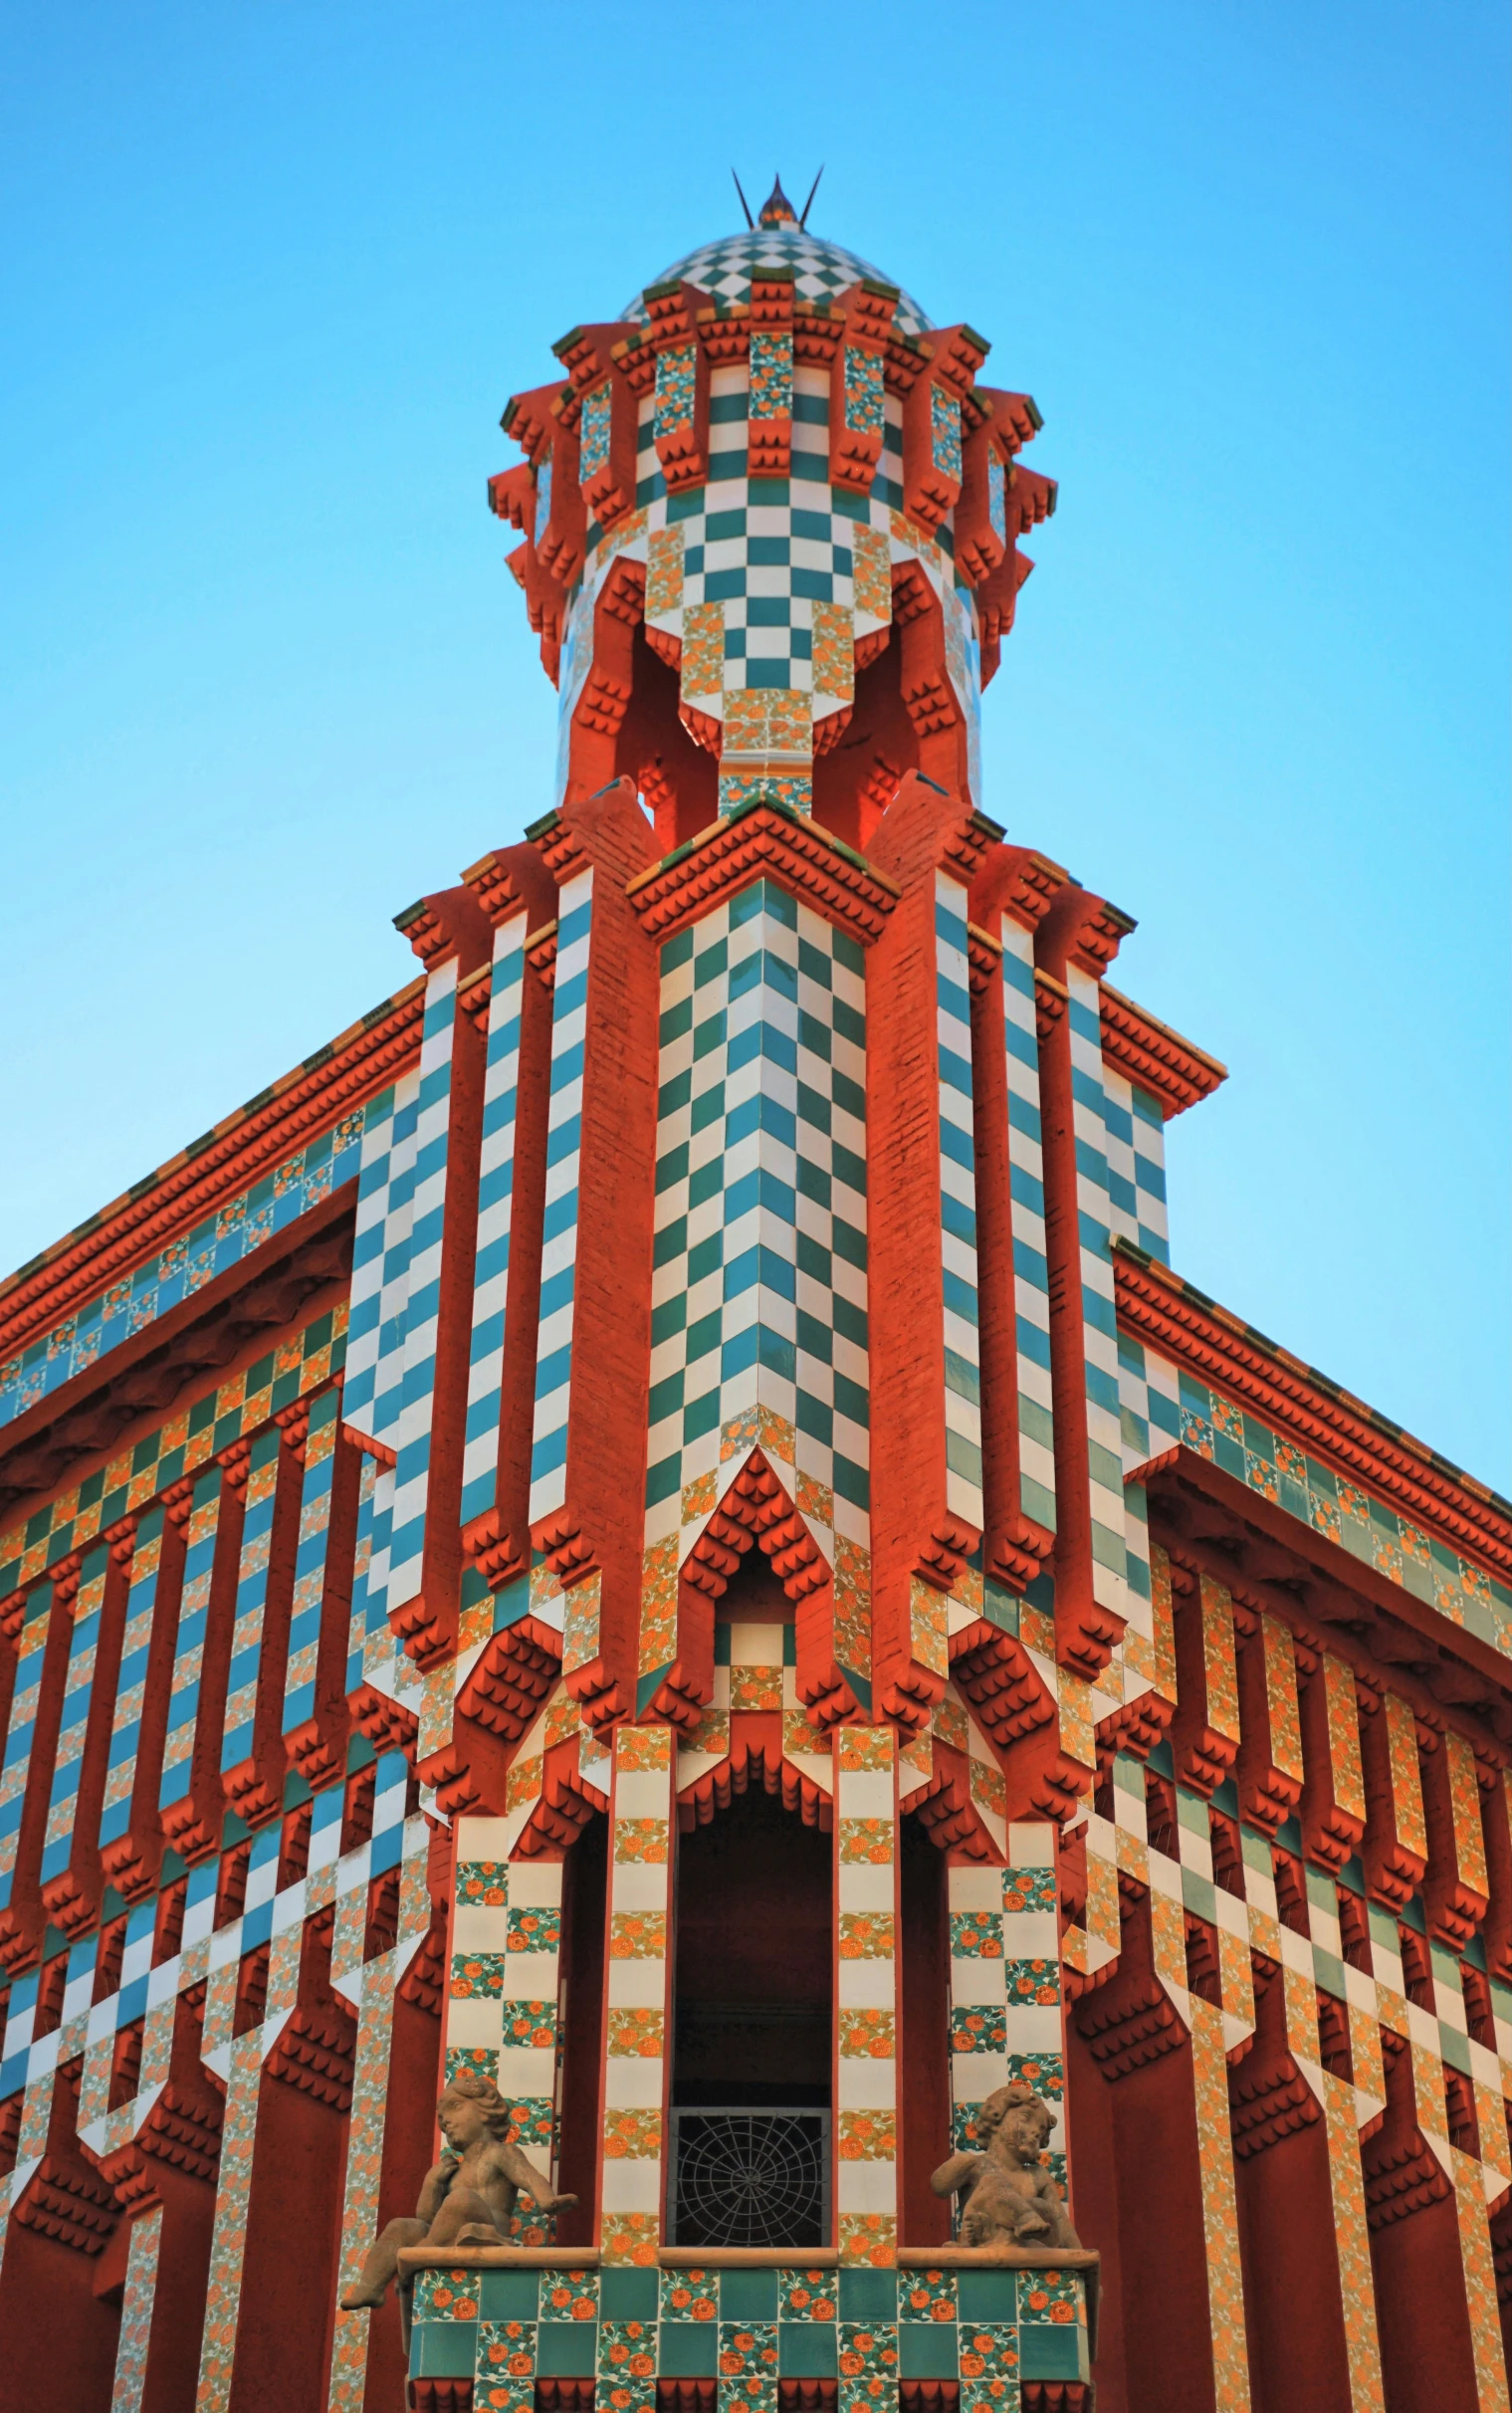 the building has several different colors and patterns on it